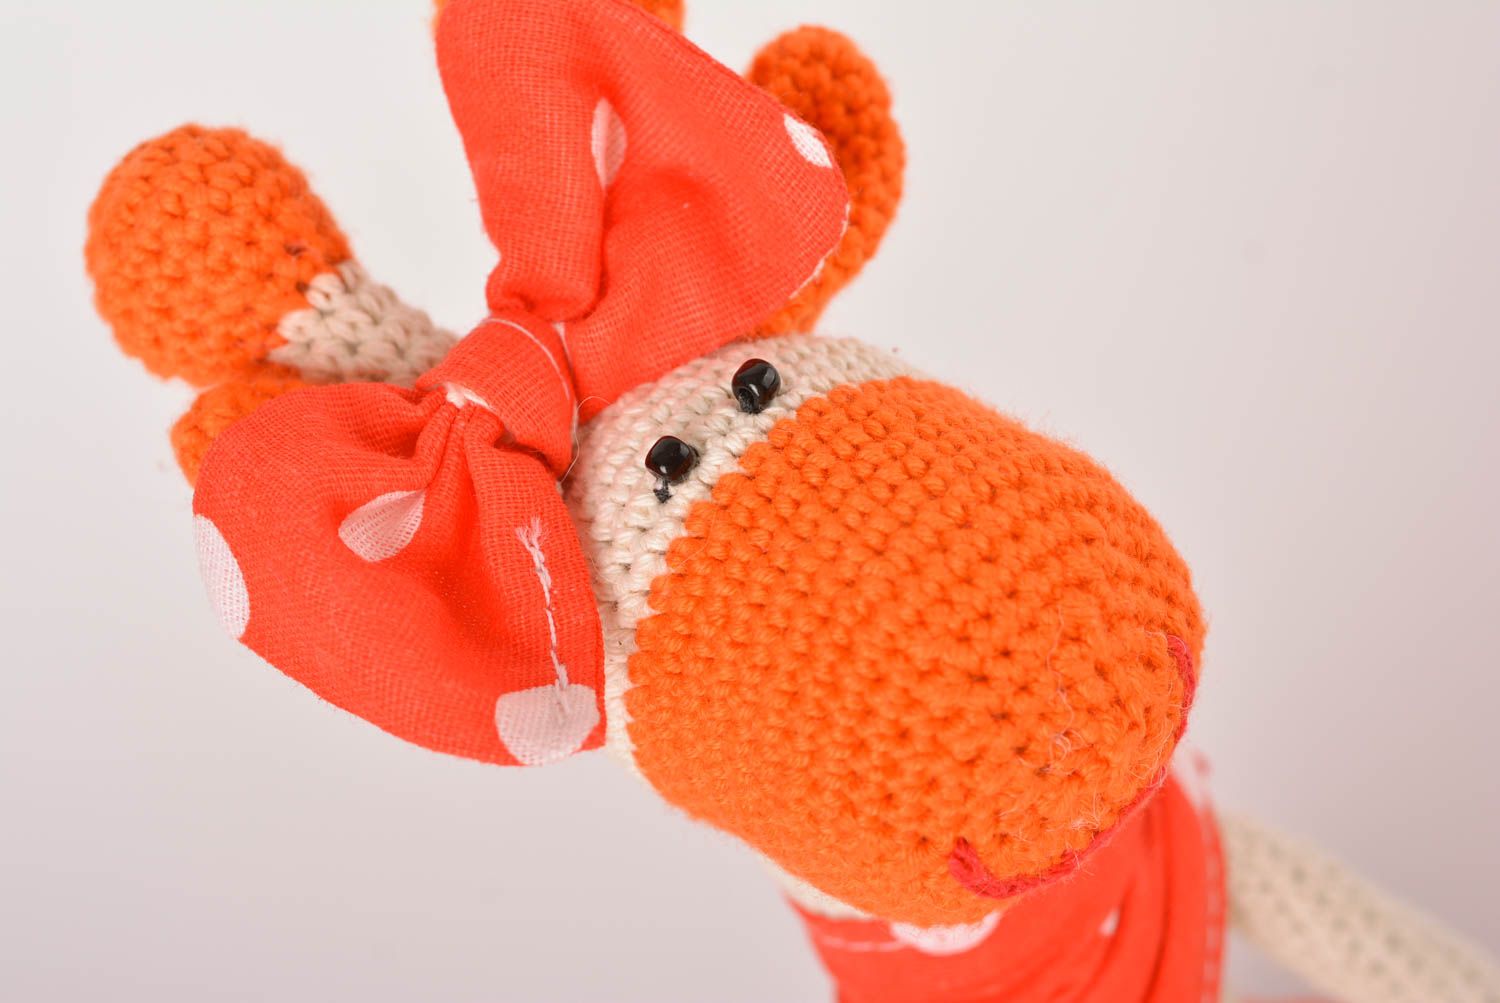 Handmade toy crocheted toy for baby unusual gift ideas animal toy soft toy photo 2